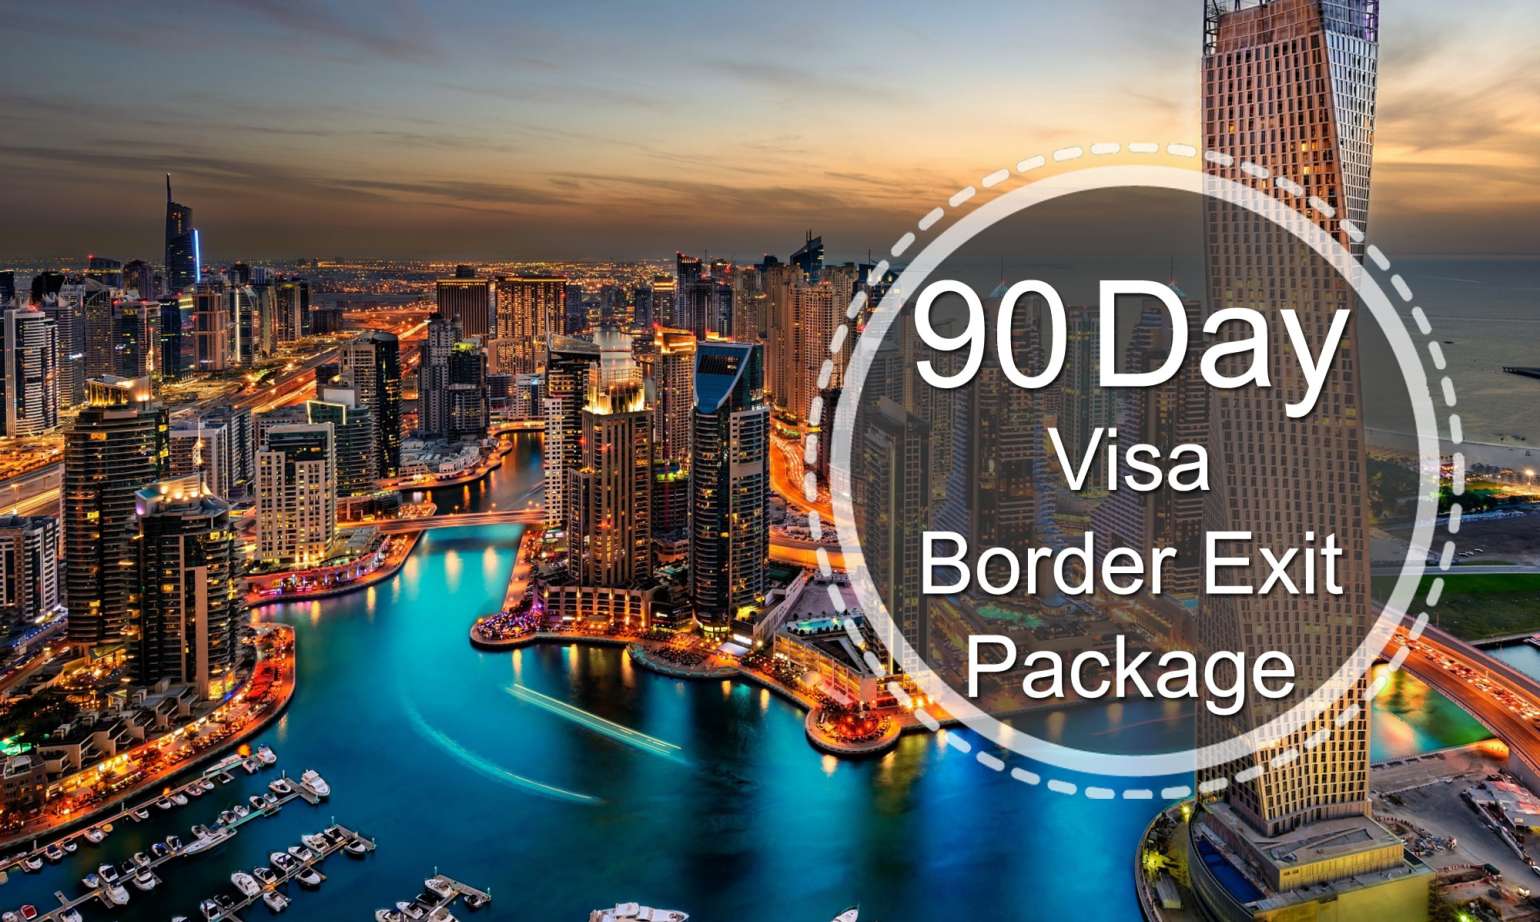 Border Exit package with 90 Days Visa